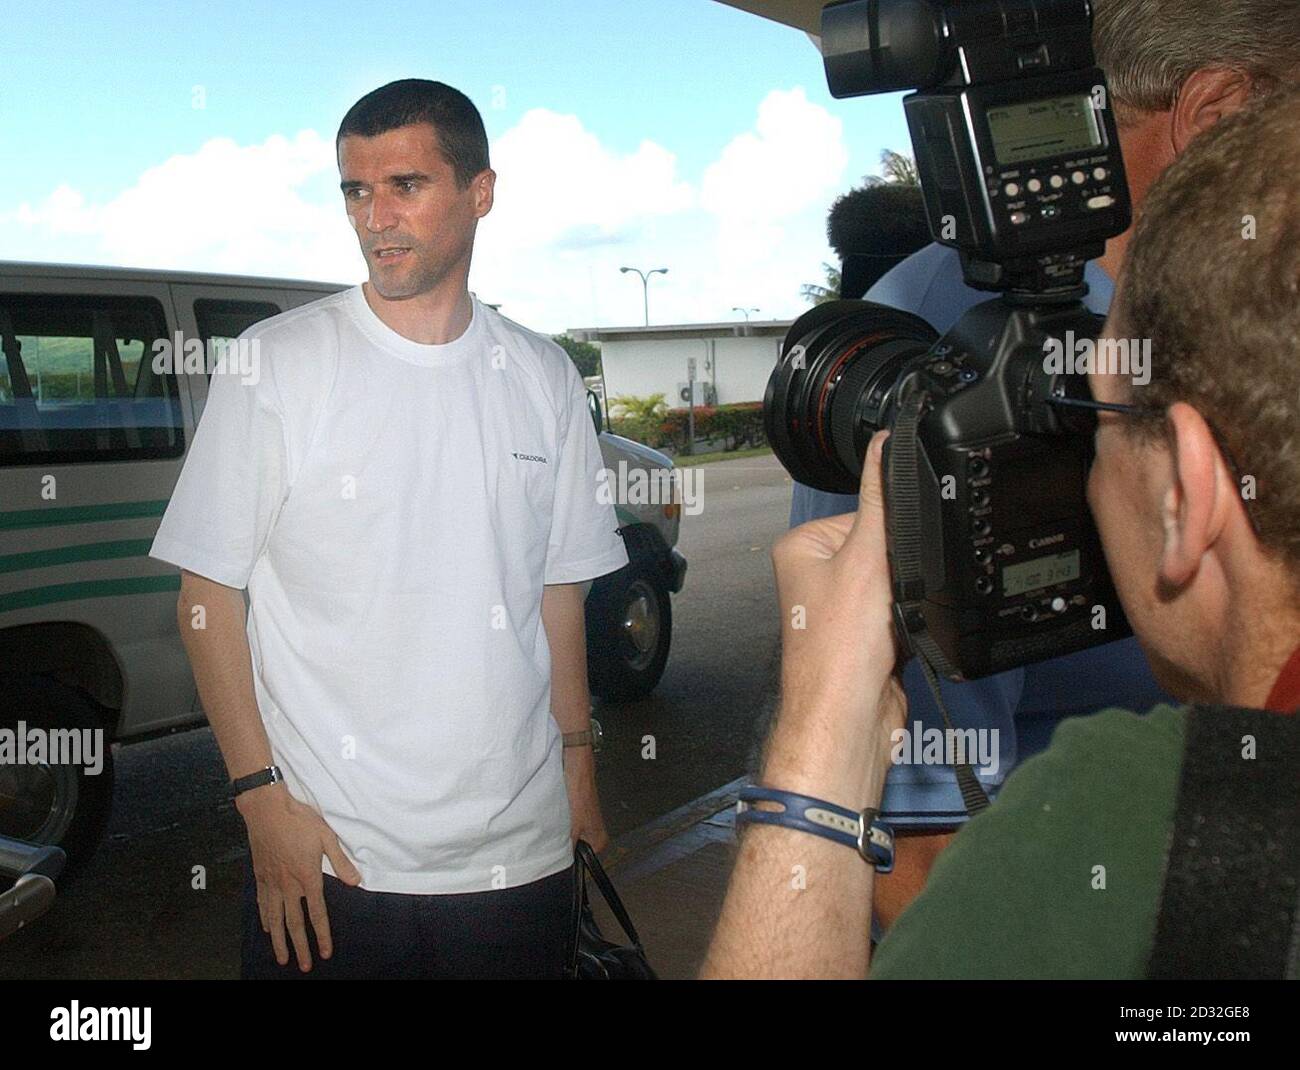 Republic of Ireland captain Roy Keane arrives at Saipan airport, after manager Mick McCarthy's shock decision to dismiss him from the World Cup squad.    *  Keane was thrown out of the team after an apparent stand-up row with McCarthy and two media interviews  in which the Manchester United star criticised in sharp detail the Irish training set-up. Stock Photo